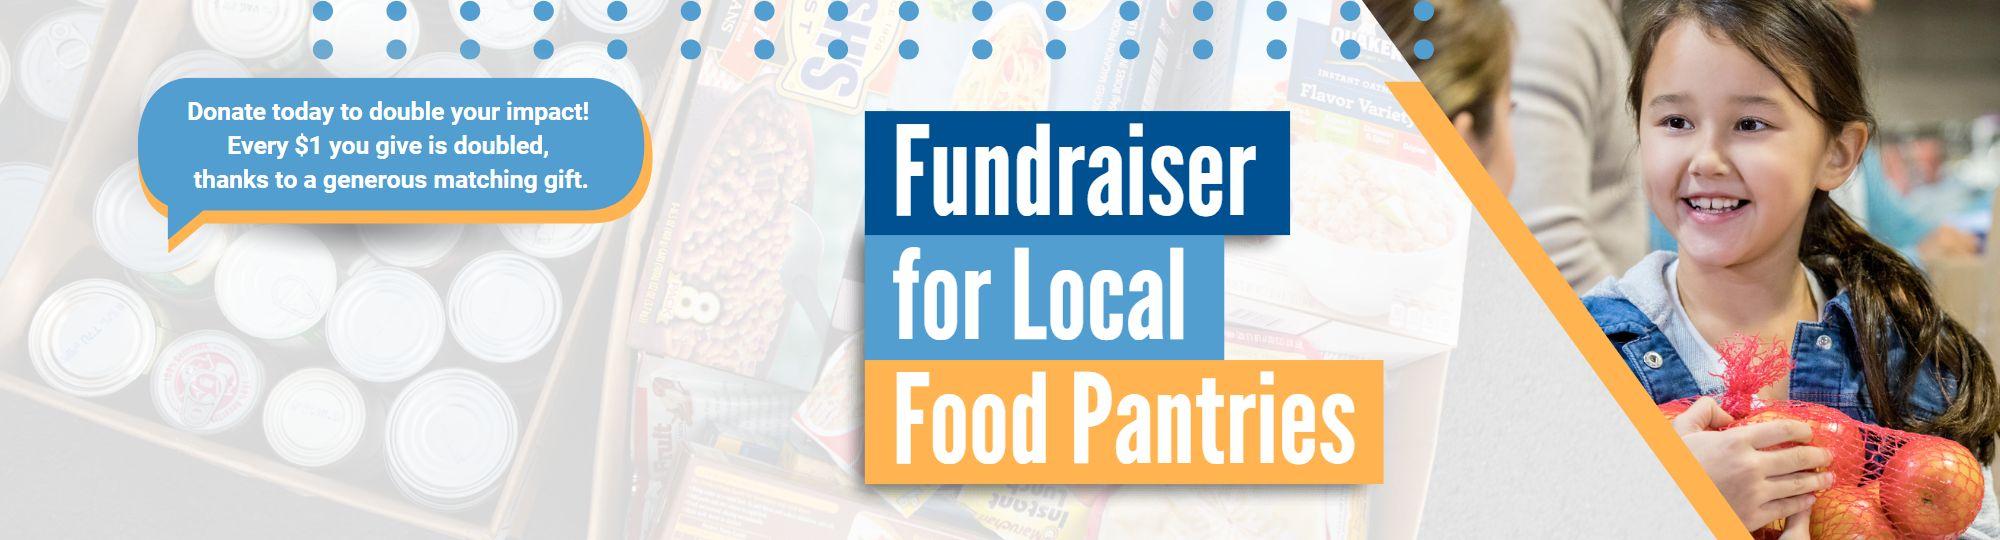 Fundraiser for Food Pantries